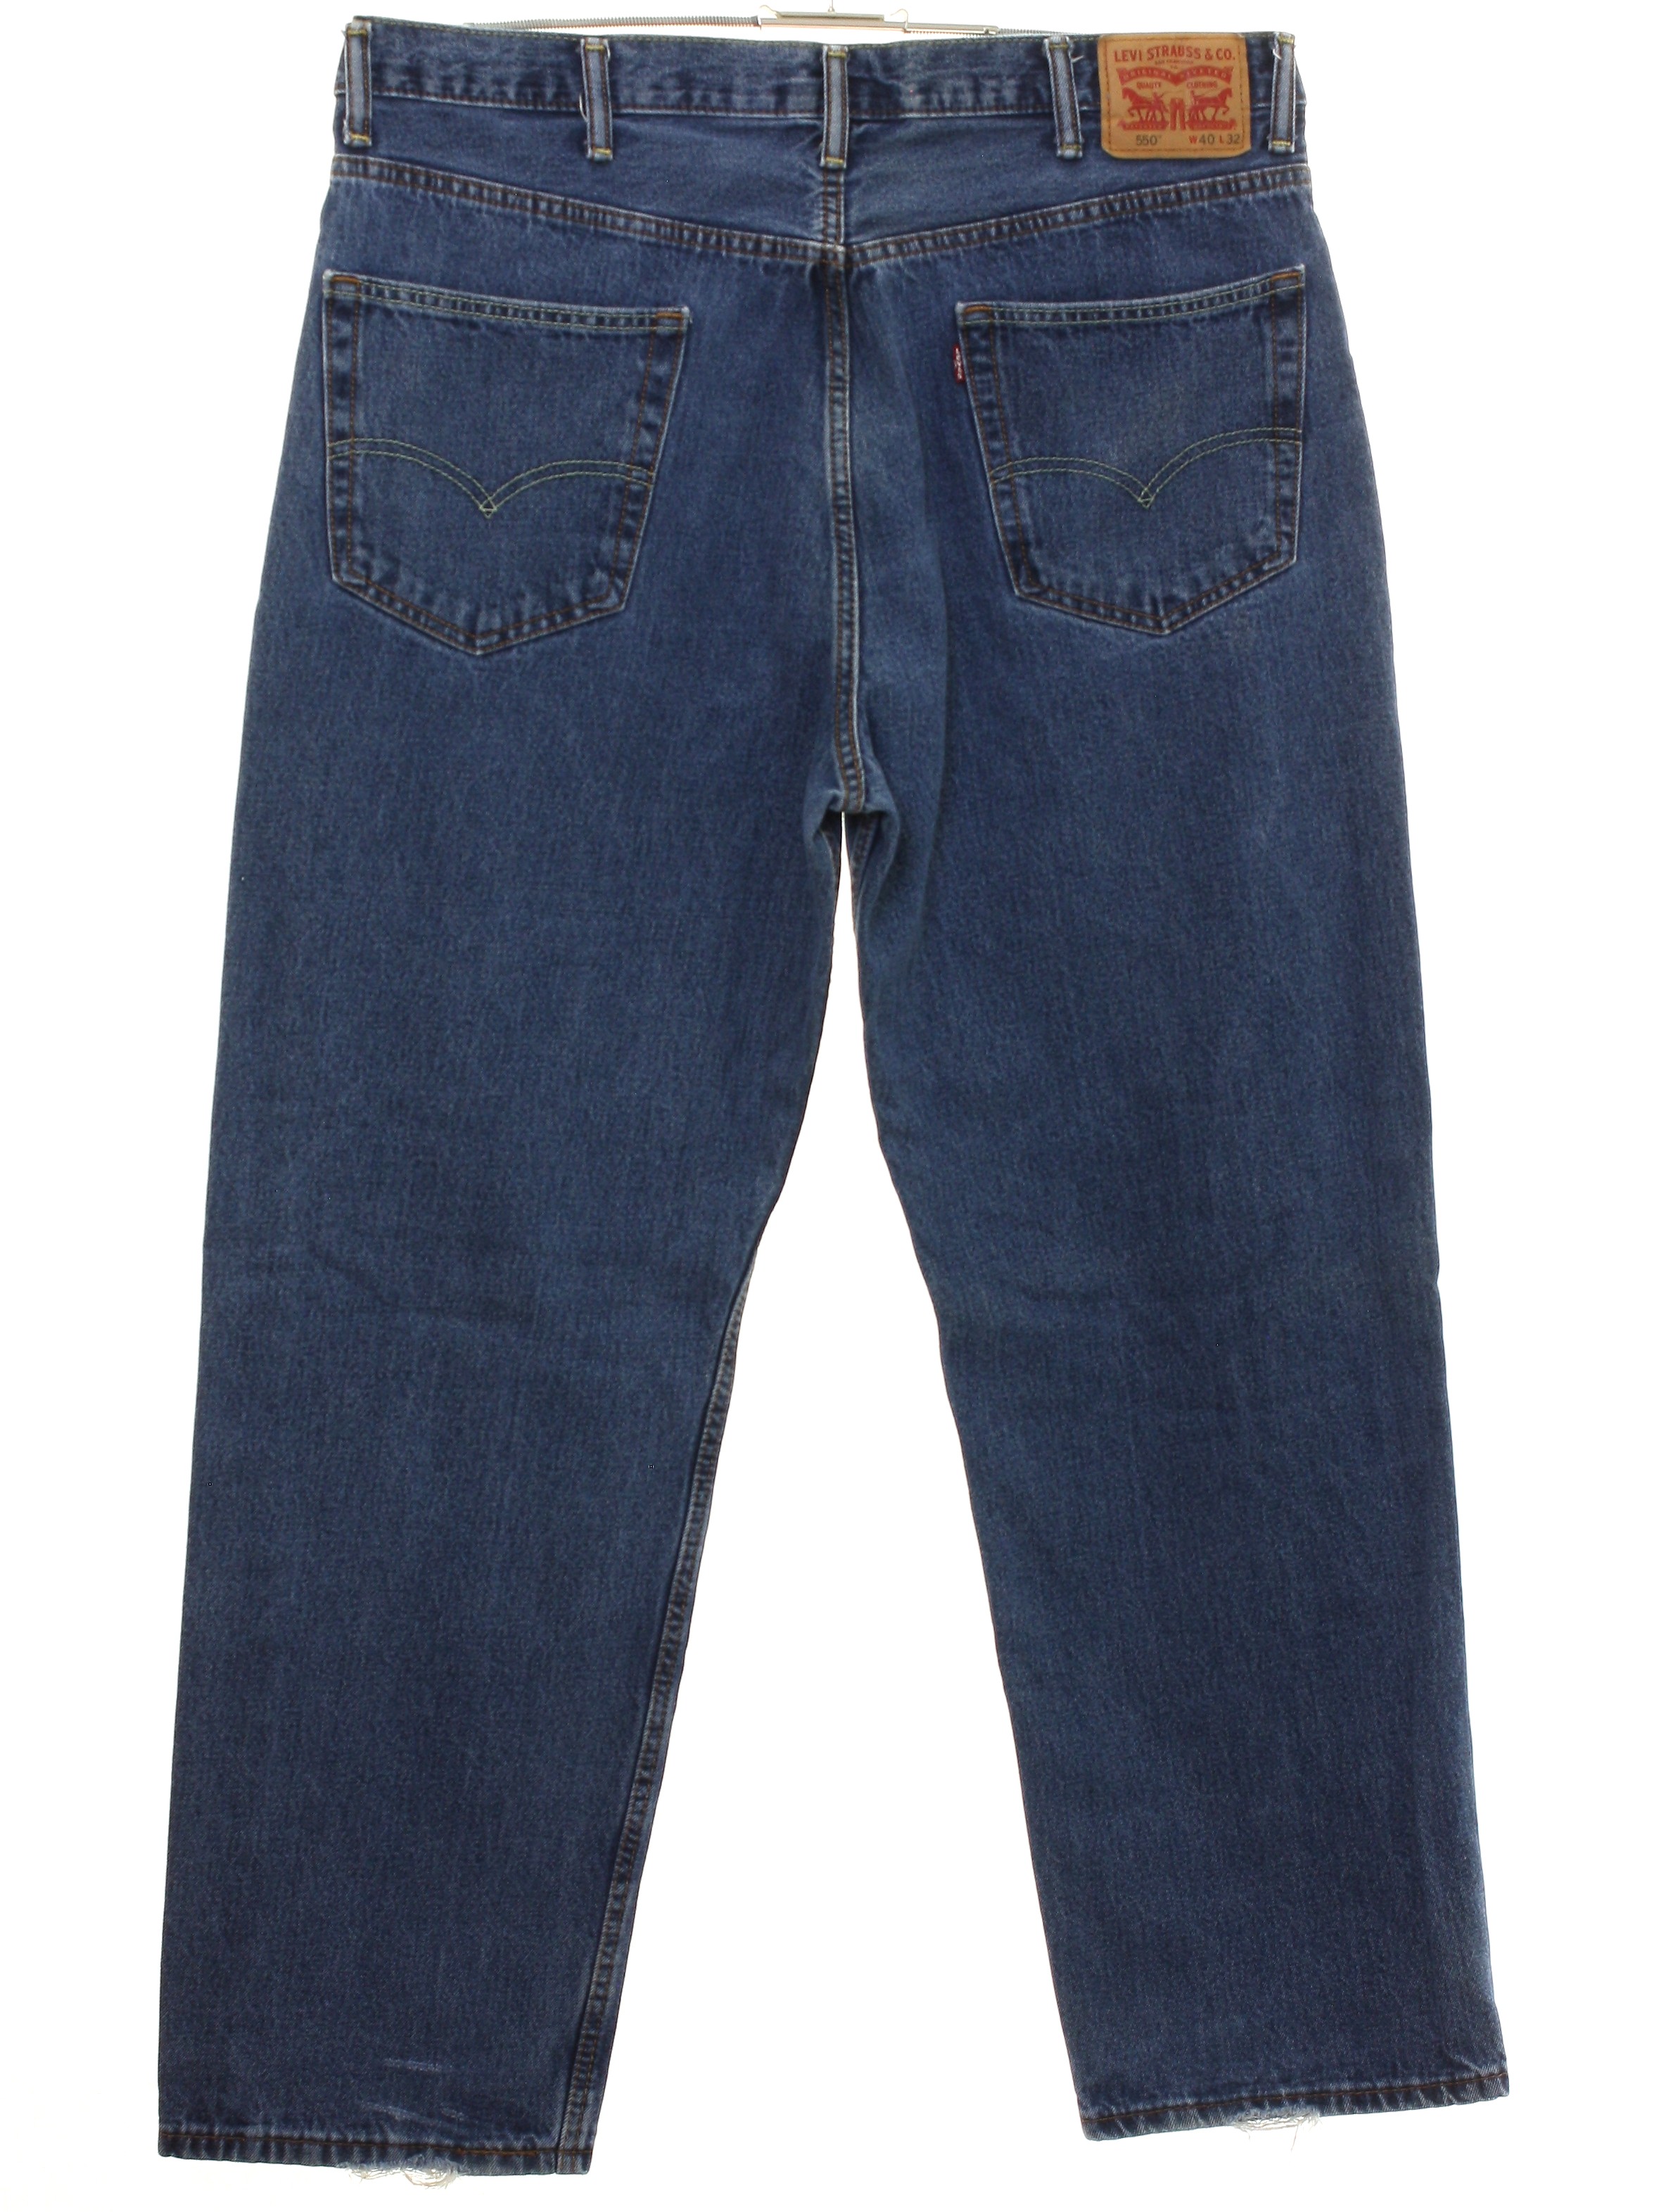 Pants: 90s -Levis 550s- Mens slightly faded and worn blue cotton denim ...